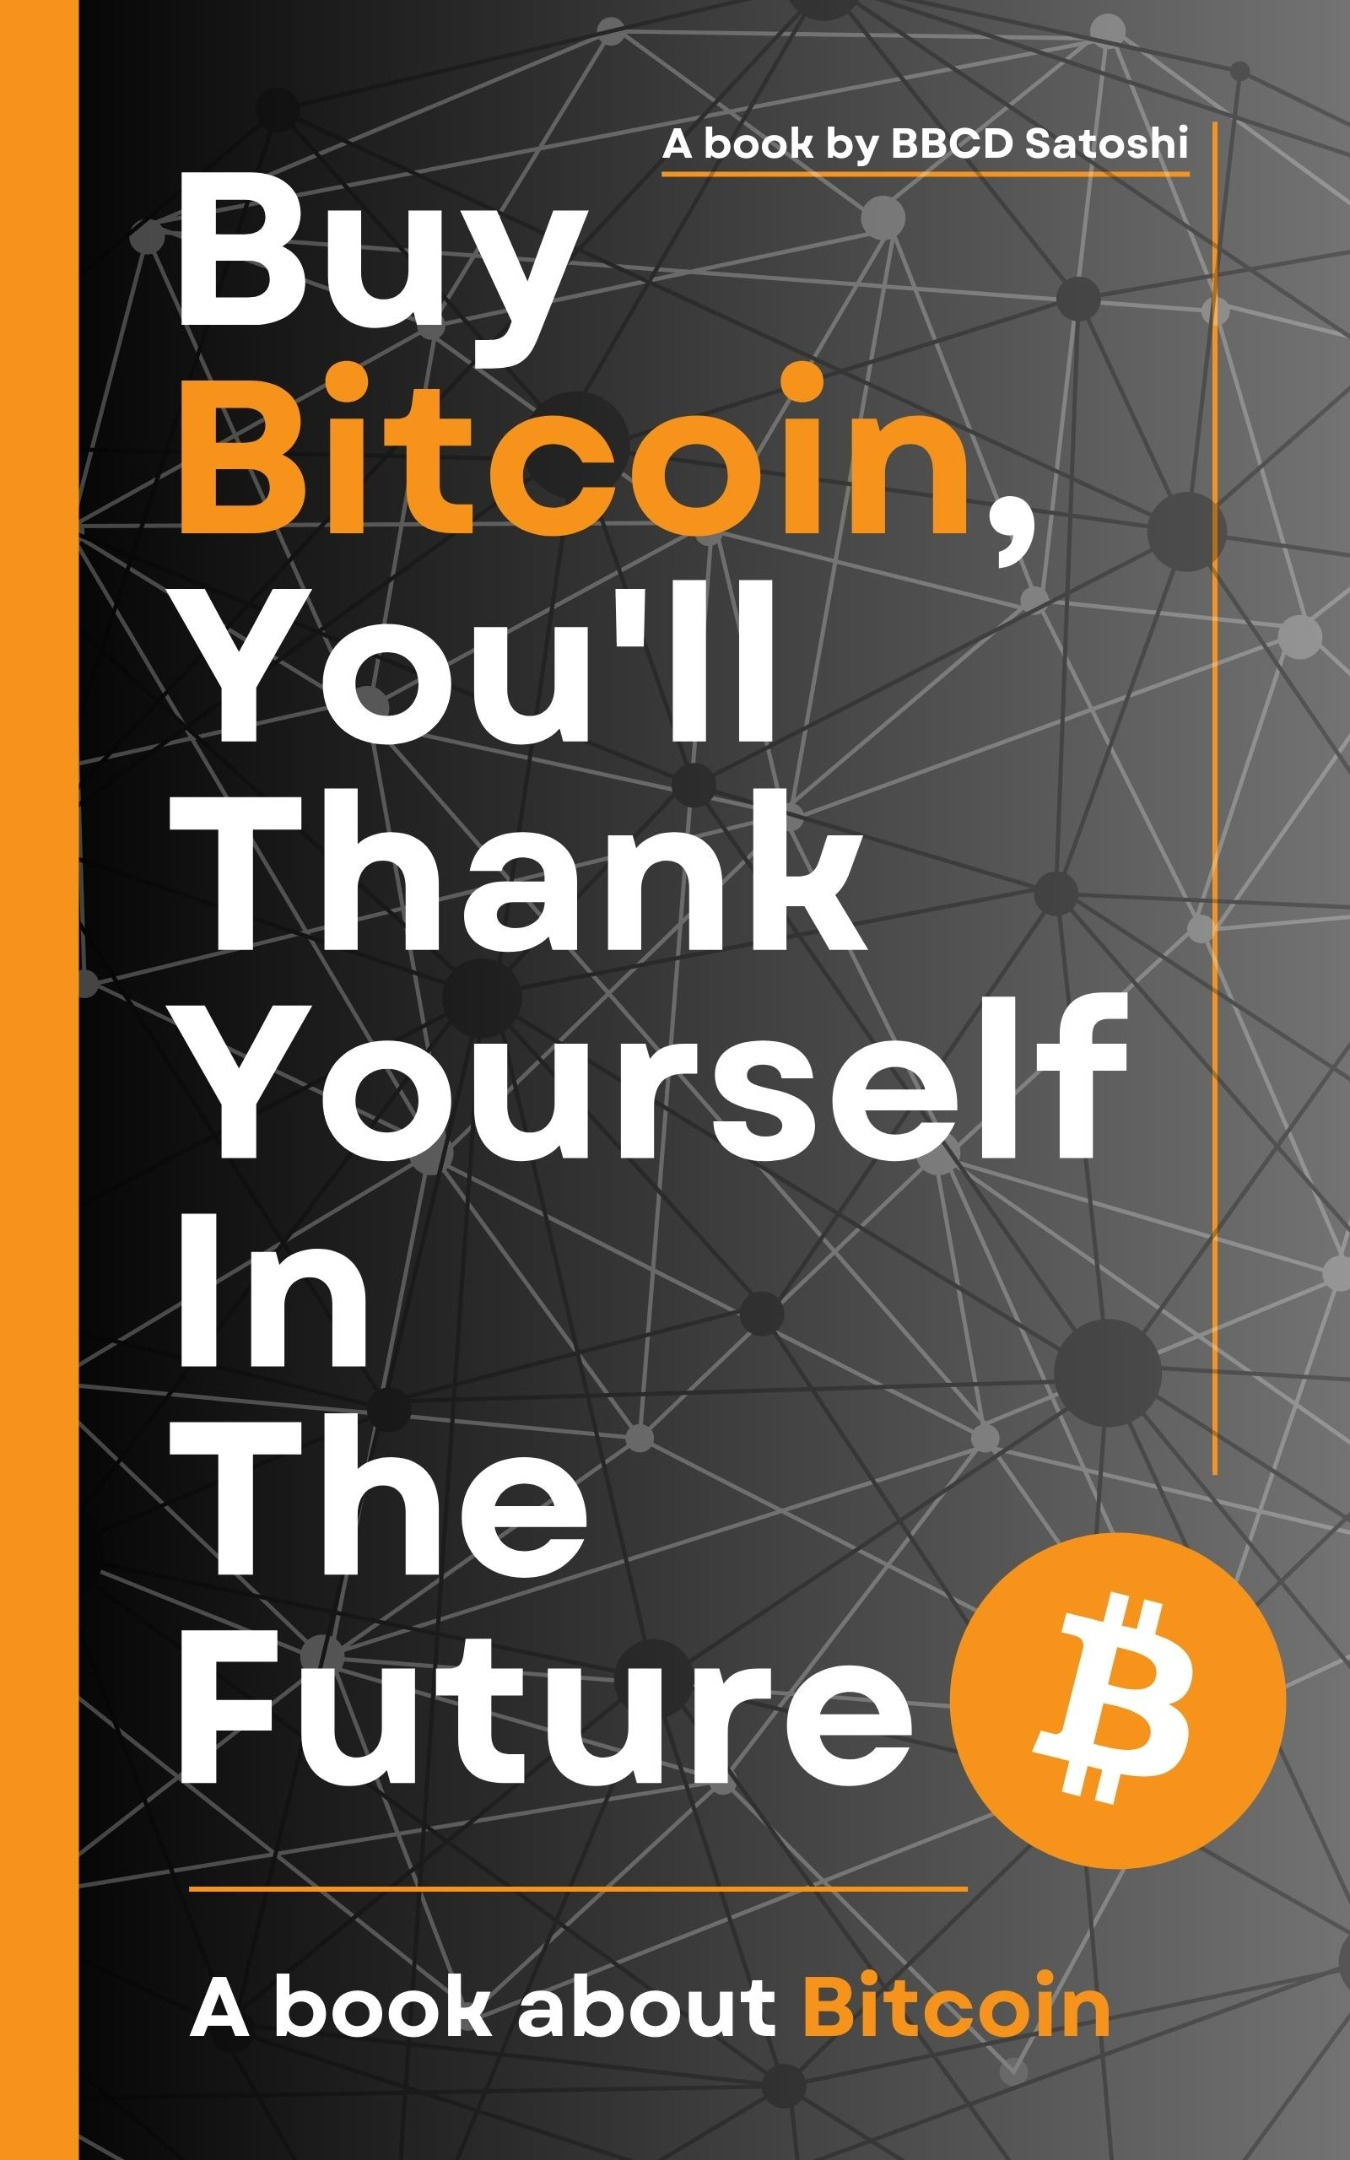 "Buy Bitcoin, You'll Thank Yourself In The Future". A book about Bitcoin by BBCD Satoshi